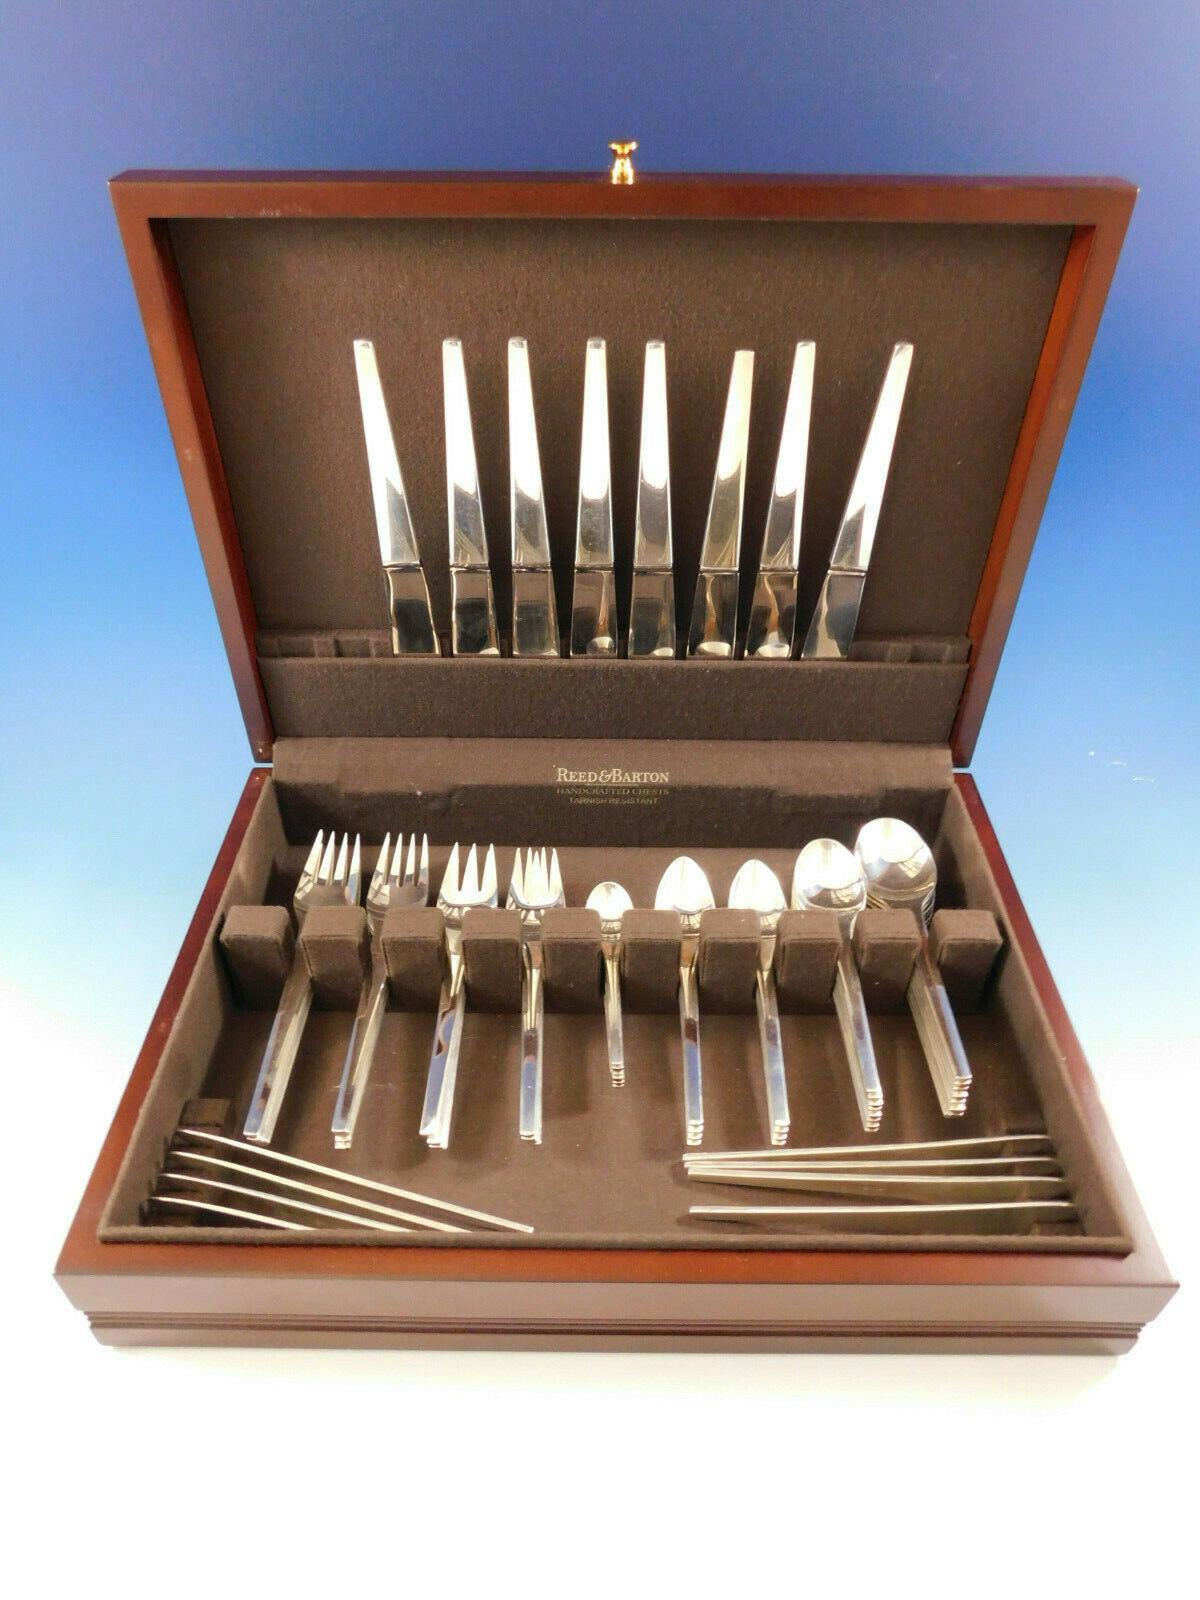 Caravel by Georg Jensen sterling silver flatware set - 64 pieces. This set includes:

8 dinner knives, 8 3/4